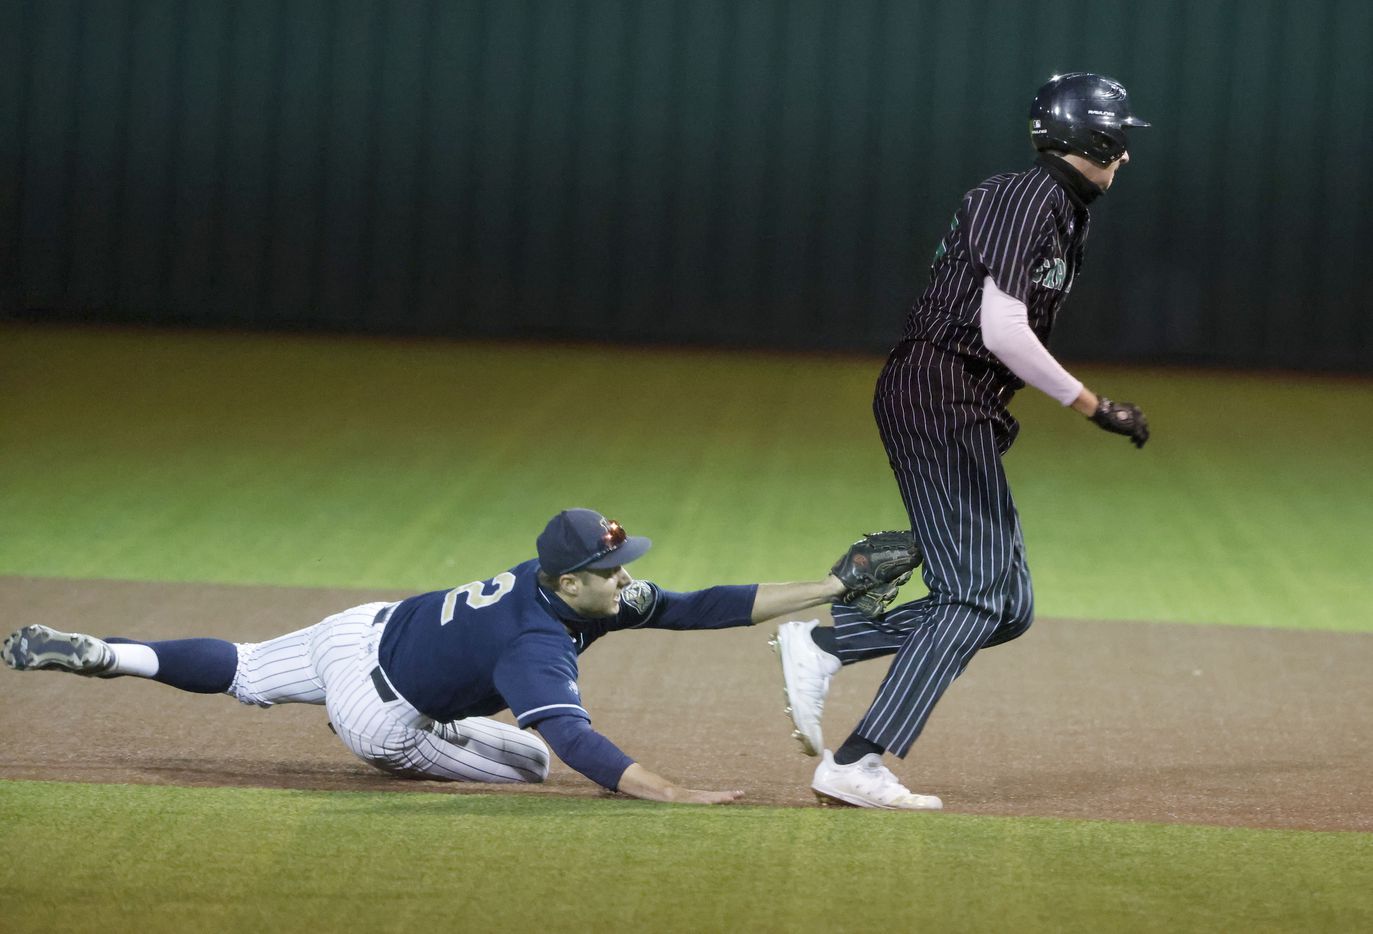 Keller’s Todd Baffa #2  tags out Southlake’s #20 Tyler White in a rundown to end the 4th inning during a Class District 4-6A baseball game in Souhtlake, Texas on March 19, 2021. (Michael Ainsworth/Special Contributor)